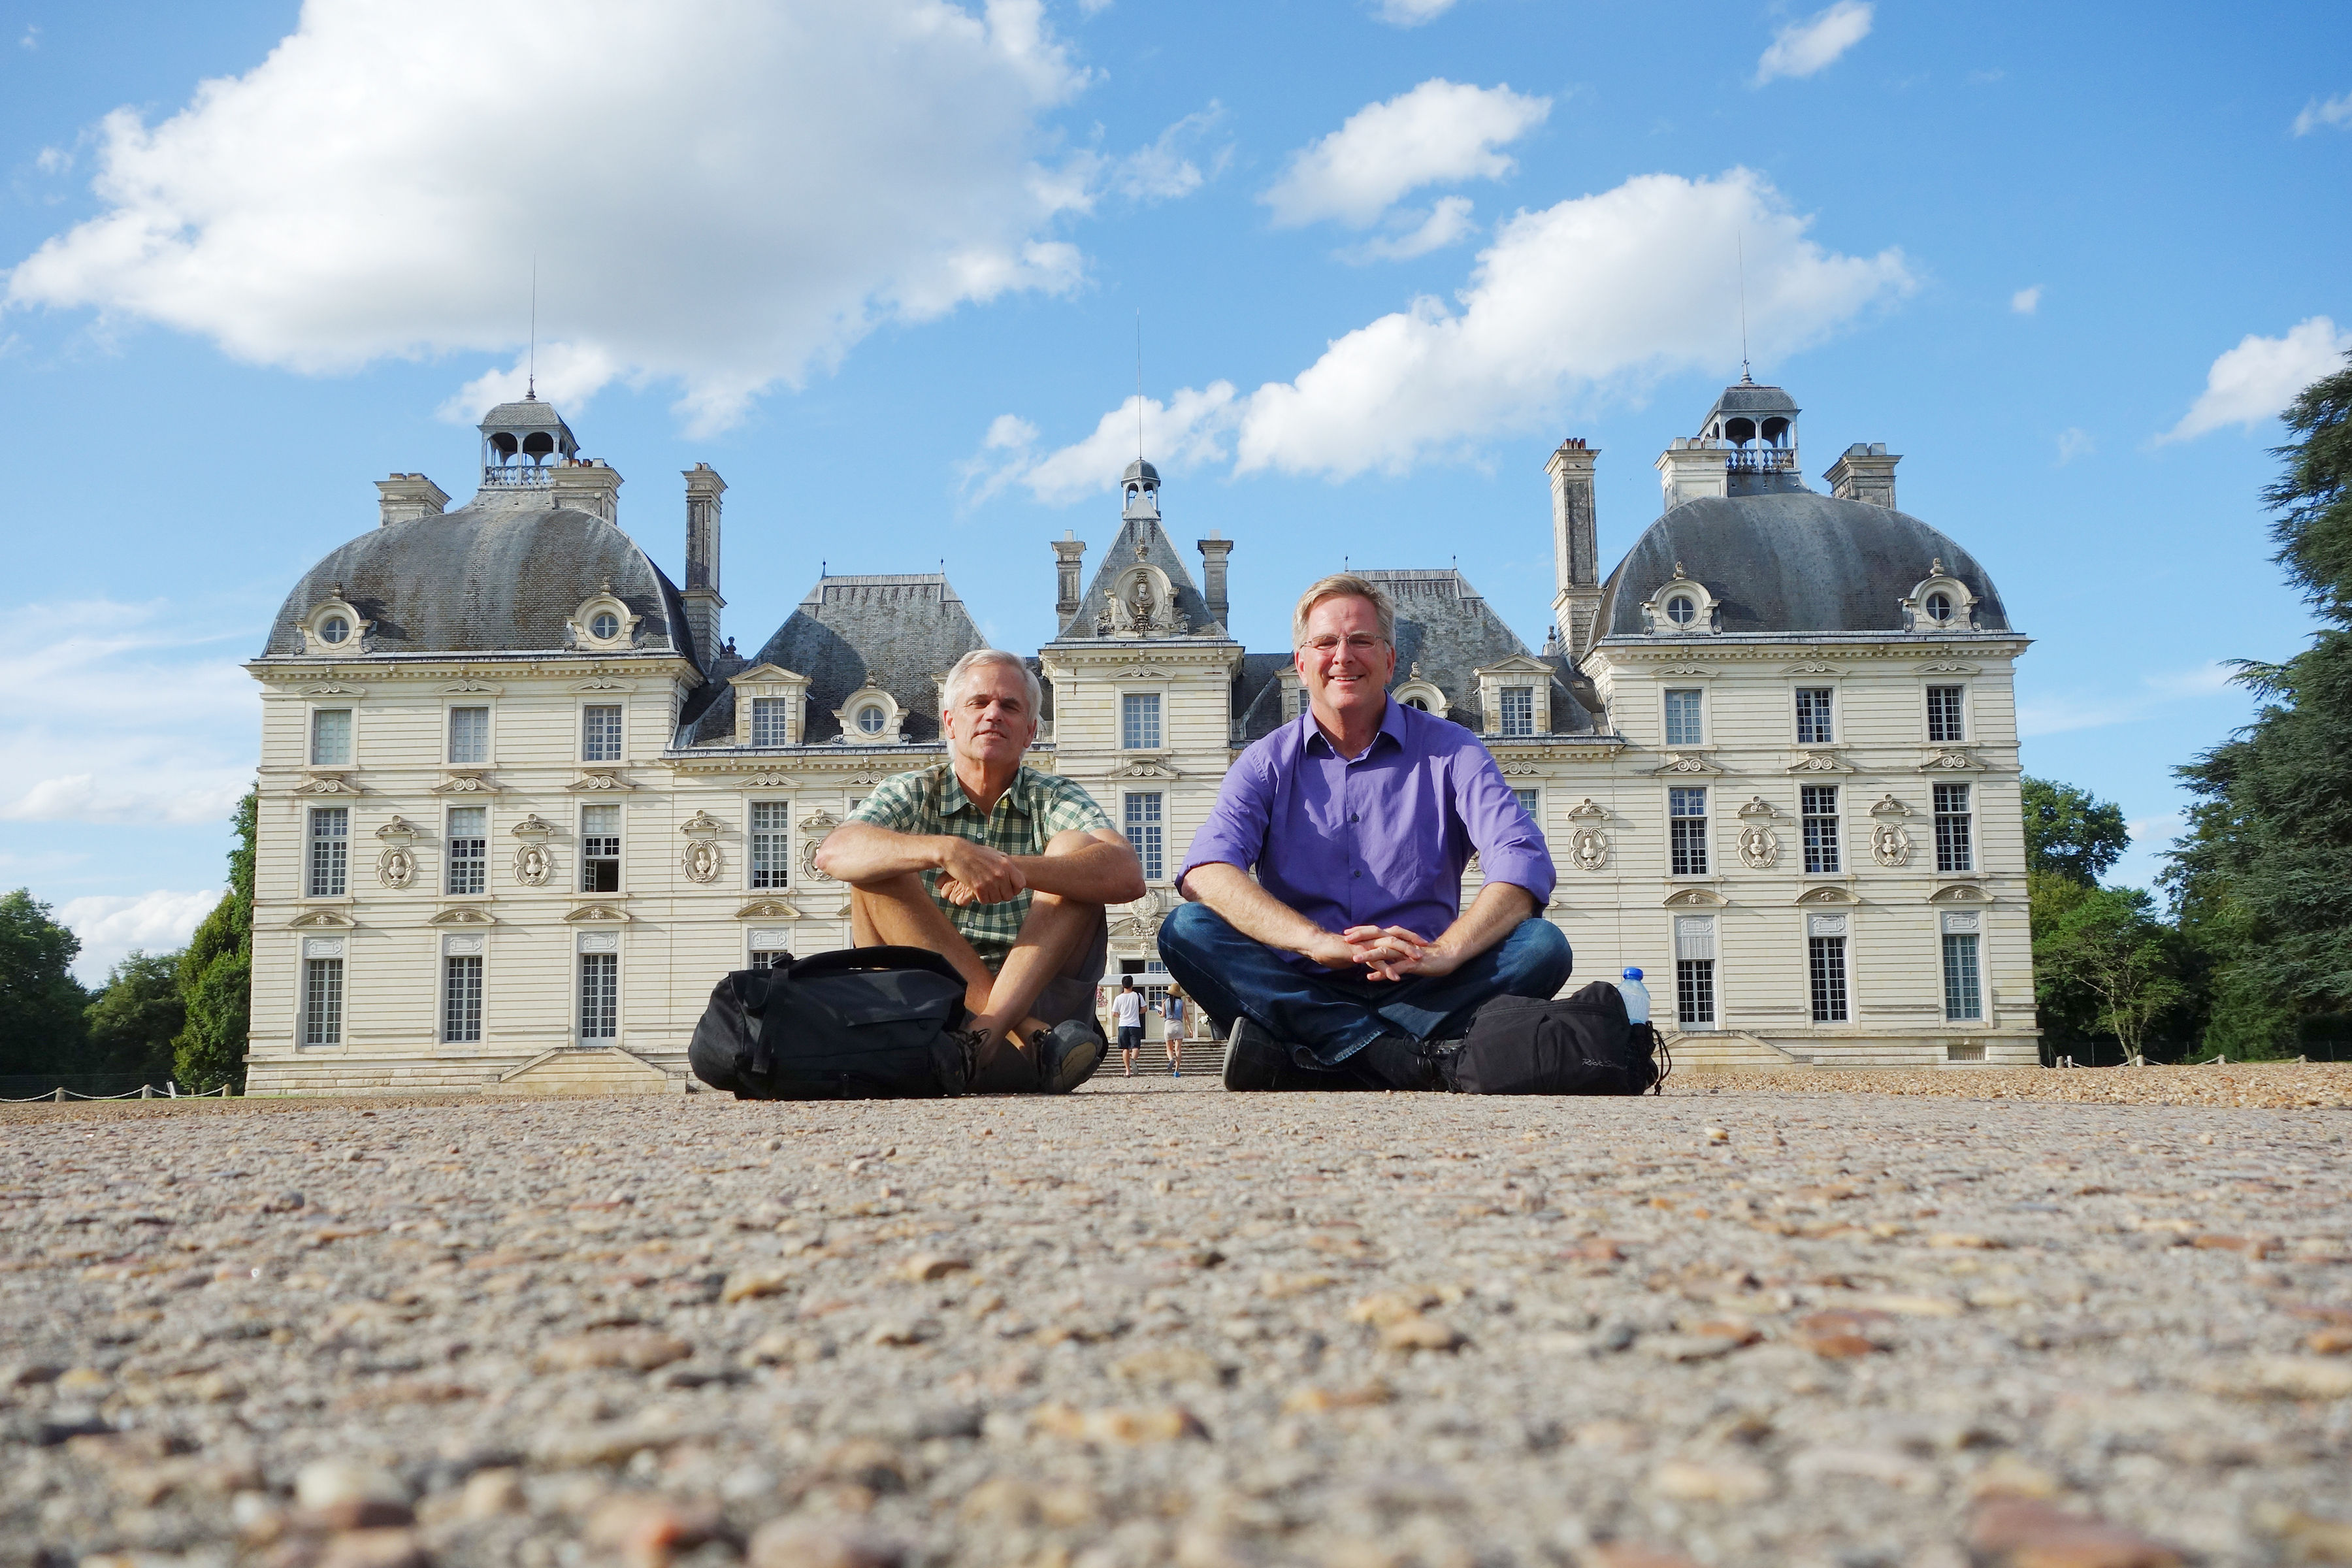 What is the Chateau de Fontainebleau in France like? - Quora